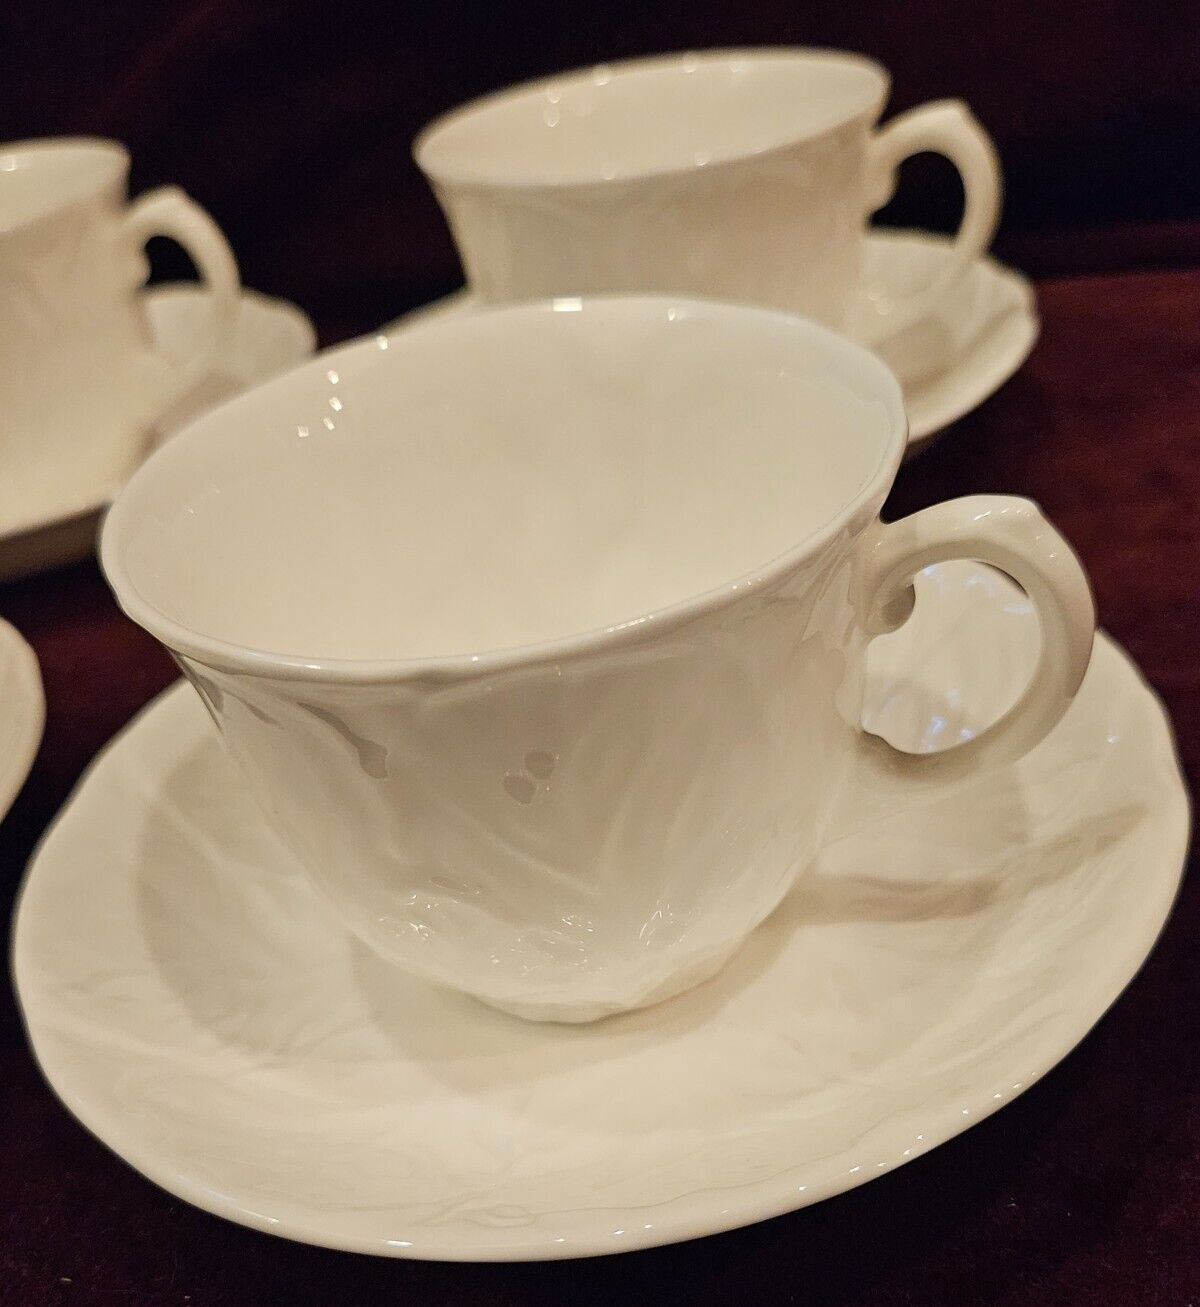 Wedgwood England 4 Cup & Saucer Sets White Countryware